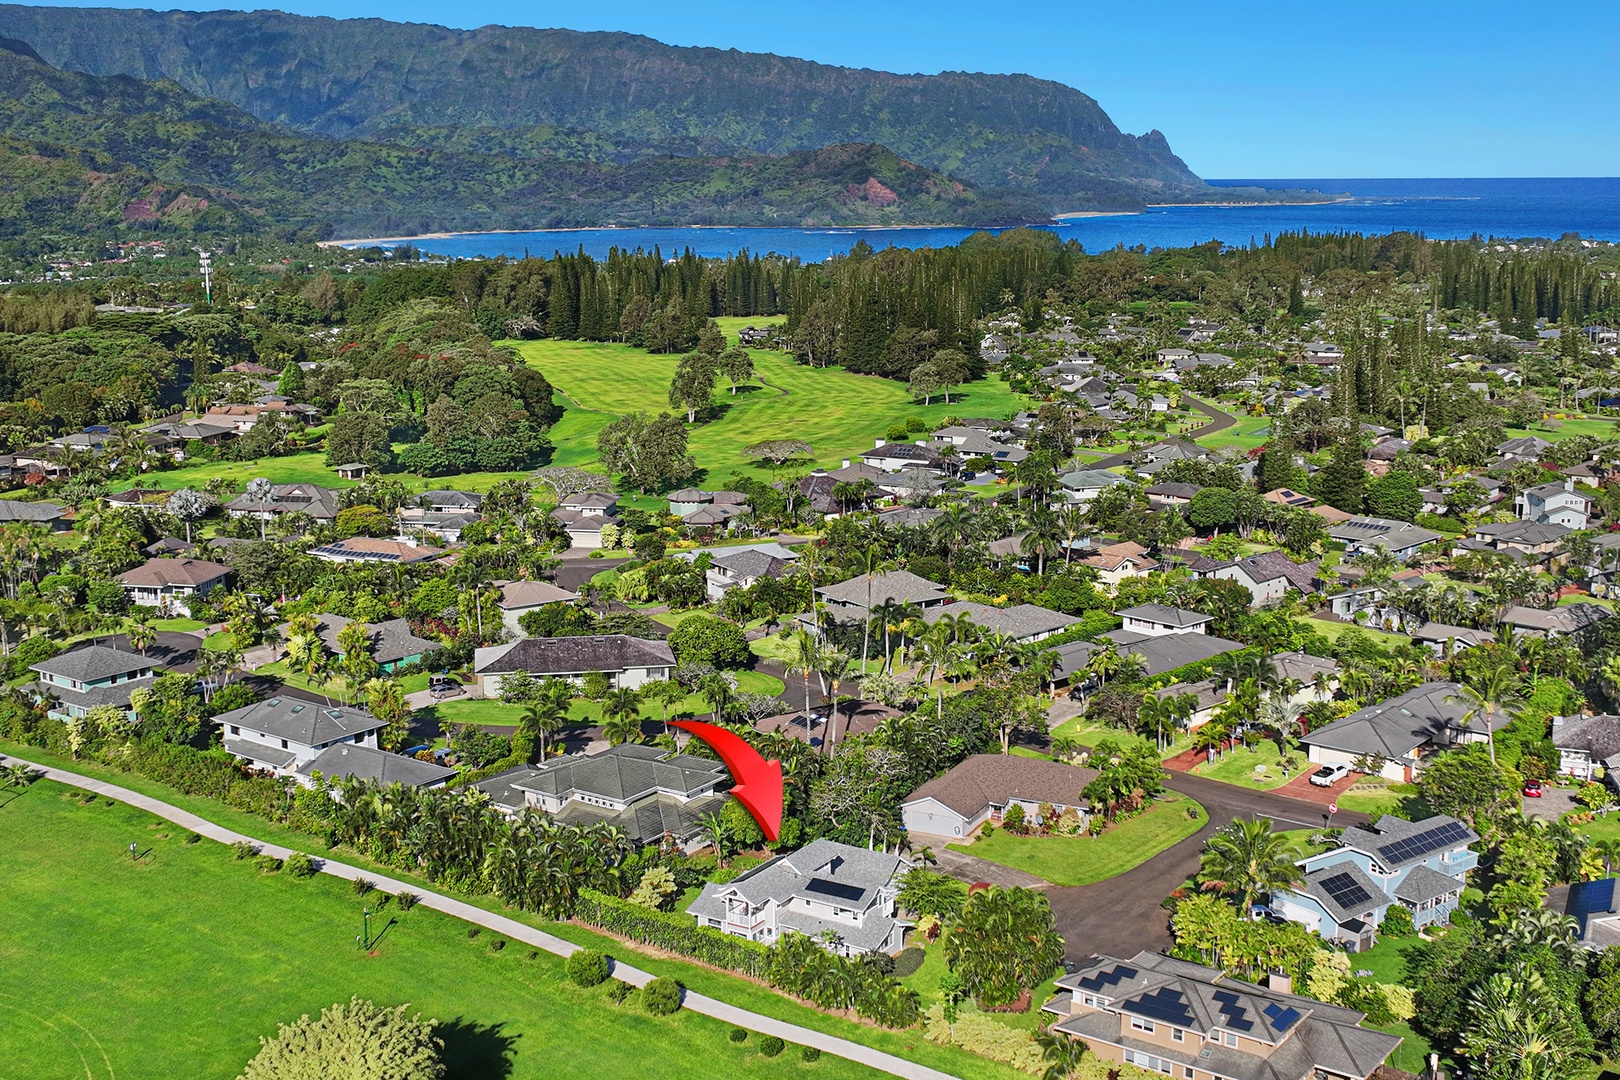 Princeville Vacation Rentals, Kaiana Villa - Aerial View of the property